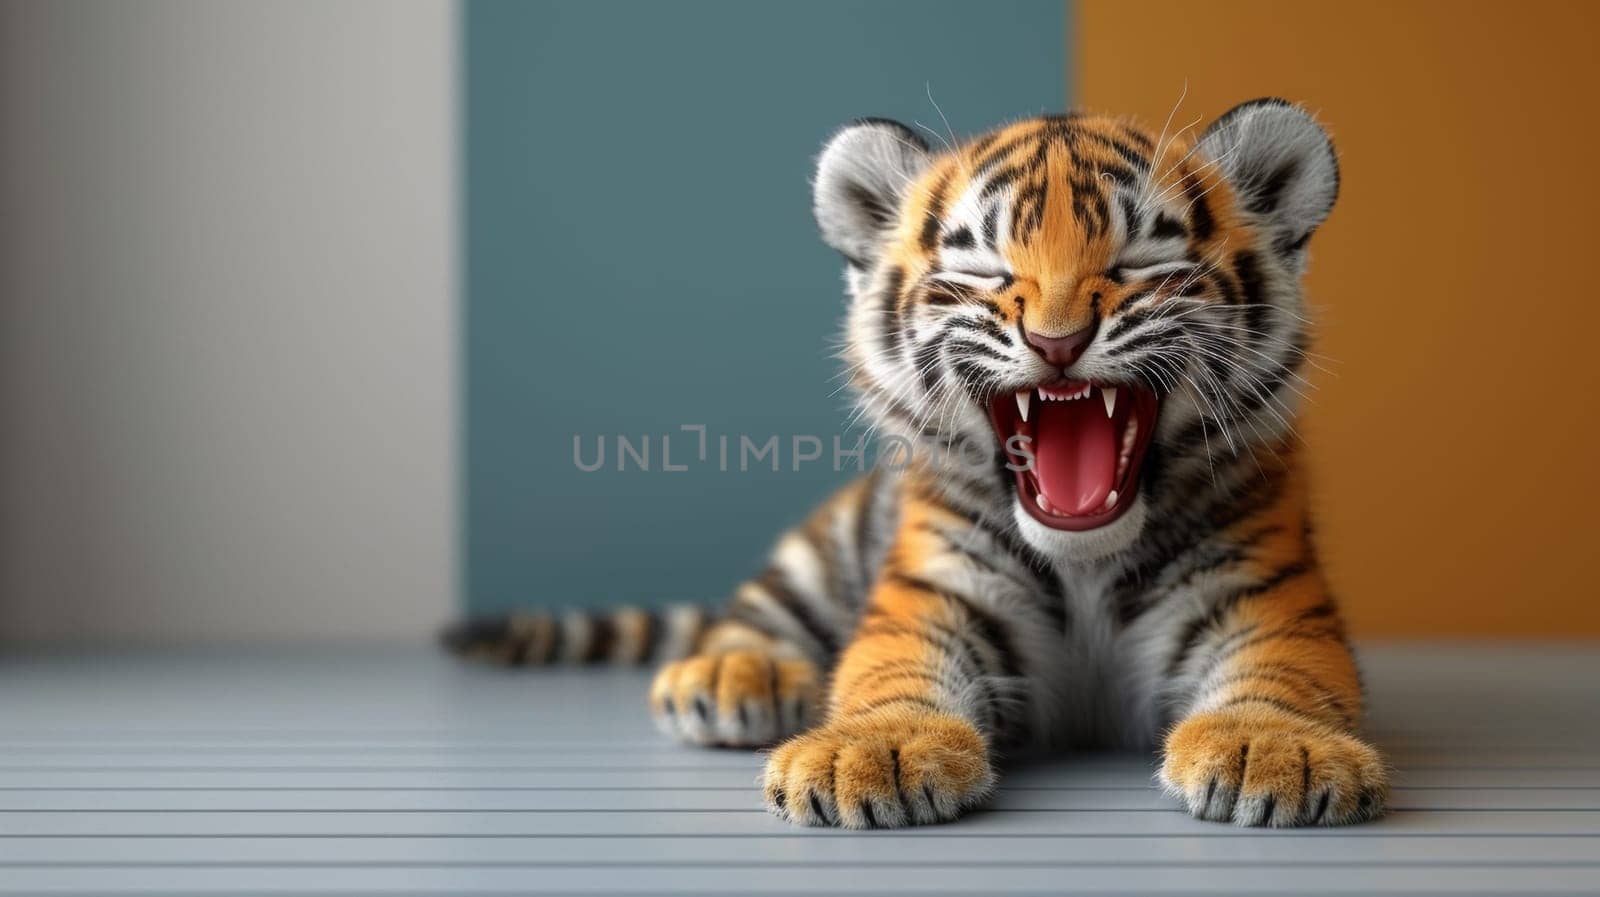 A tiger cub yawning on a table with its mouth open, AI by starush